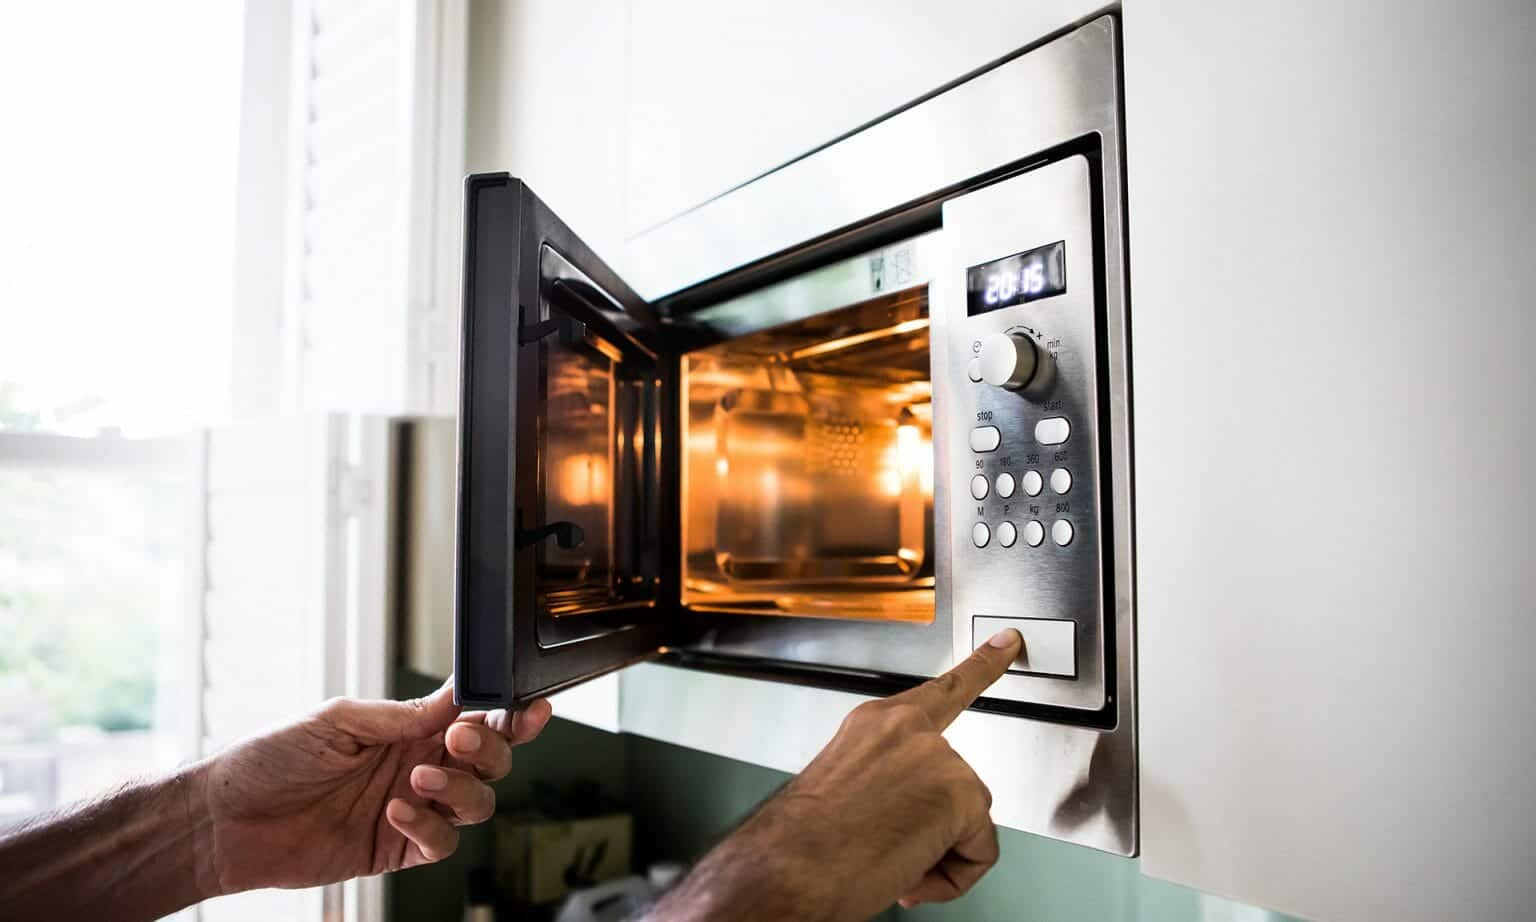 How To Mute A Microwave With Or Without A Mute Button